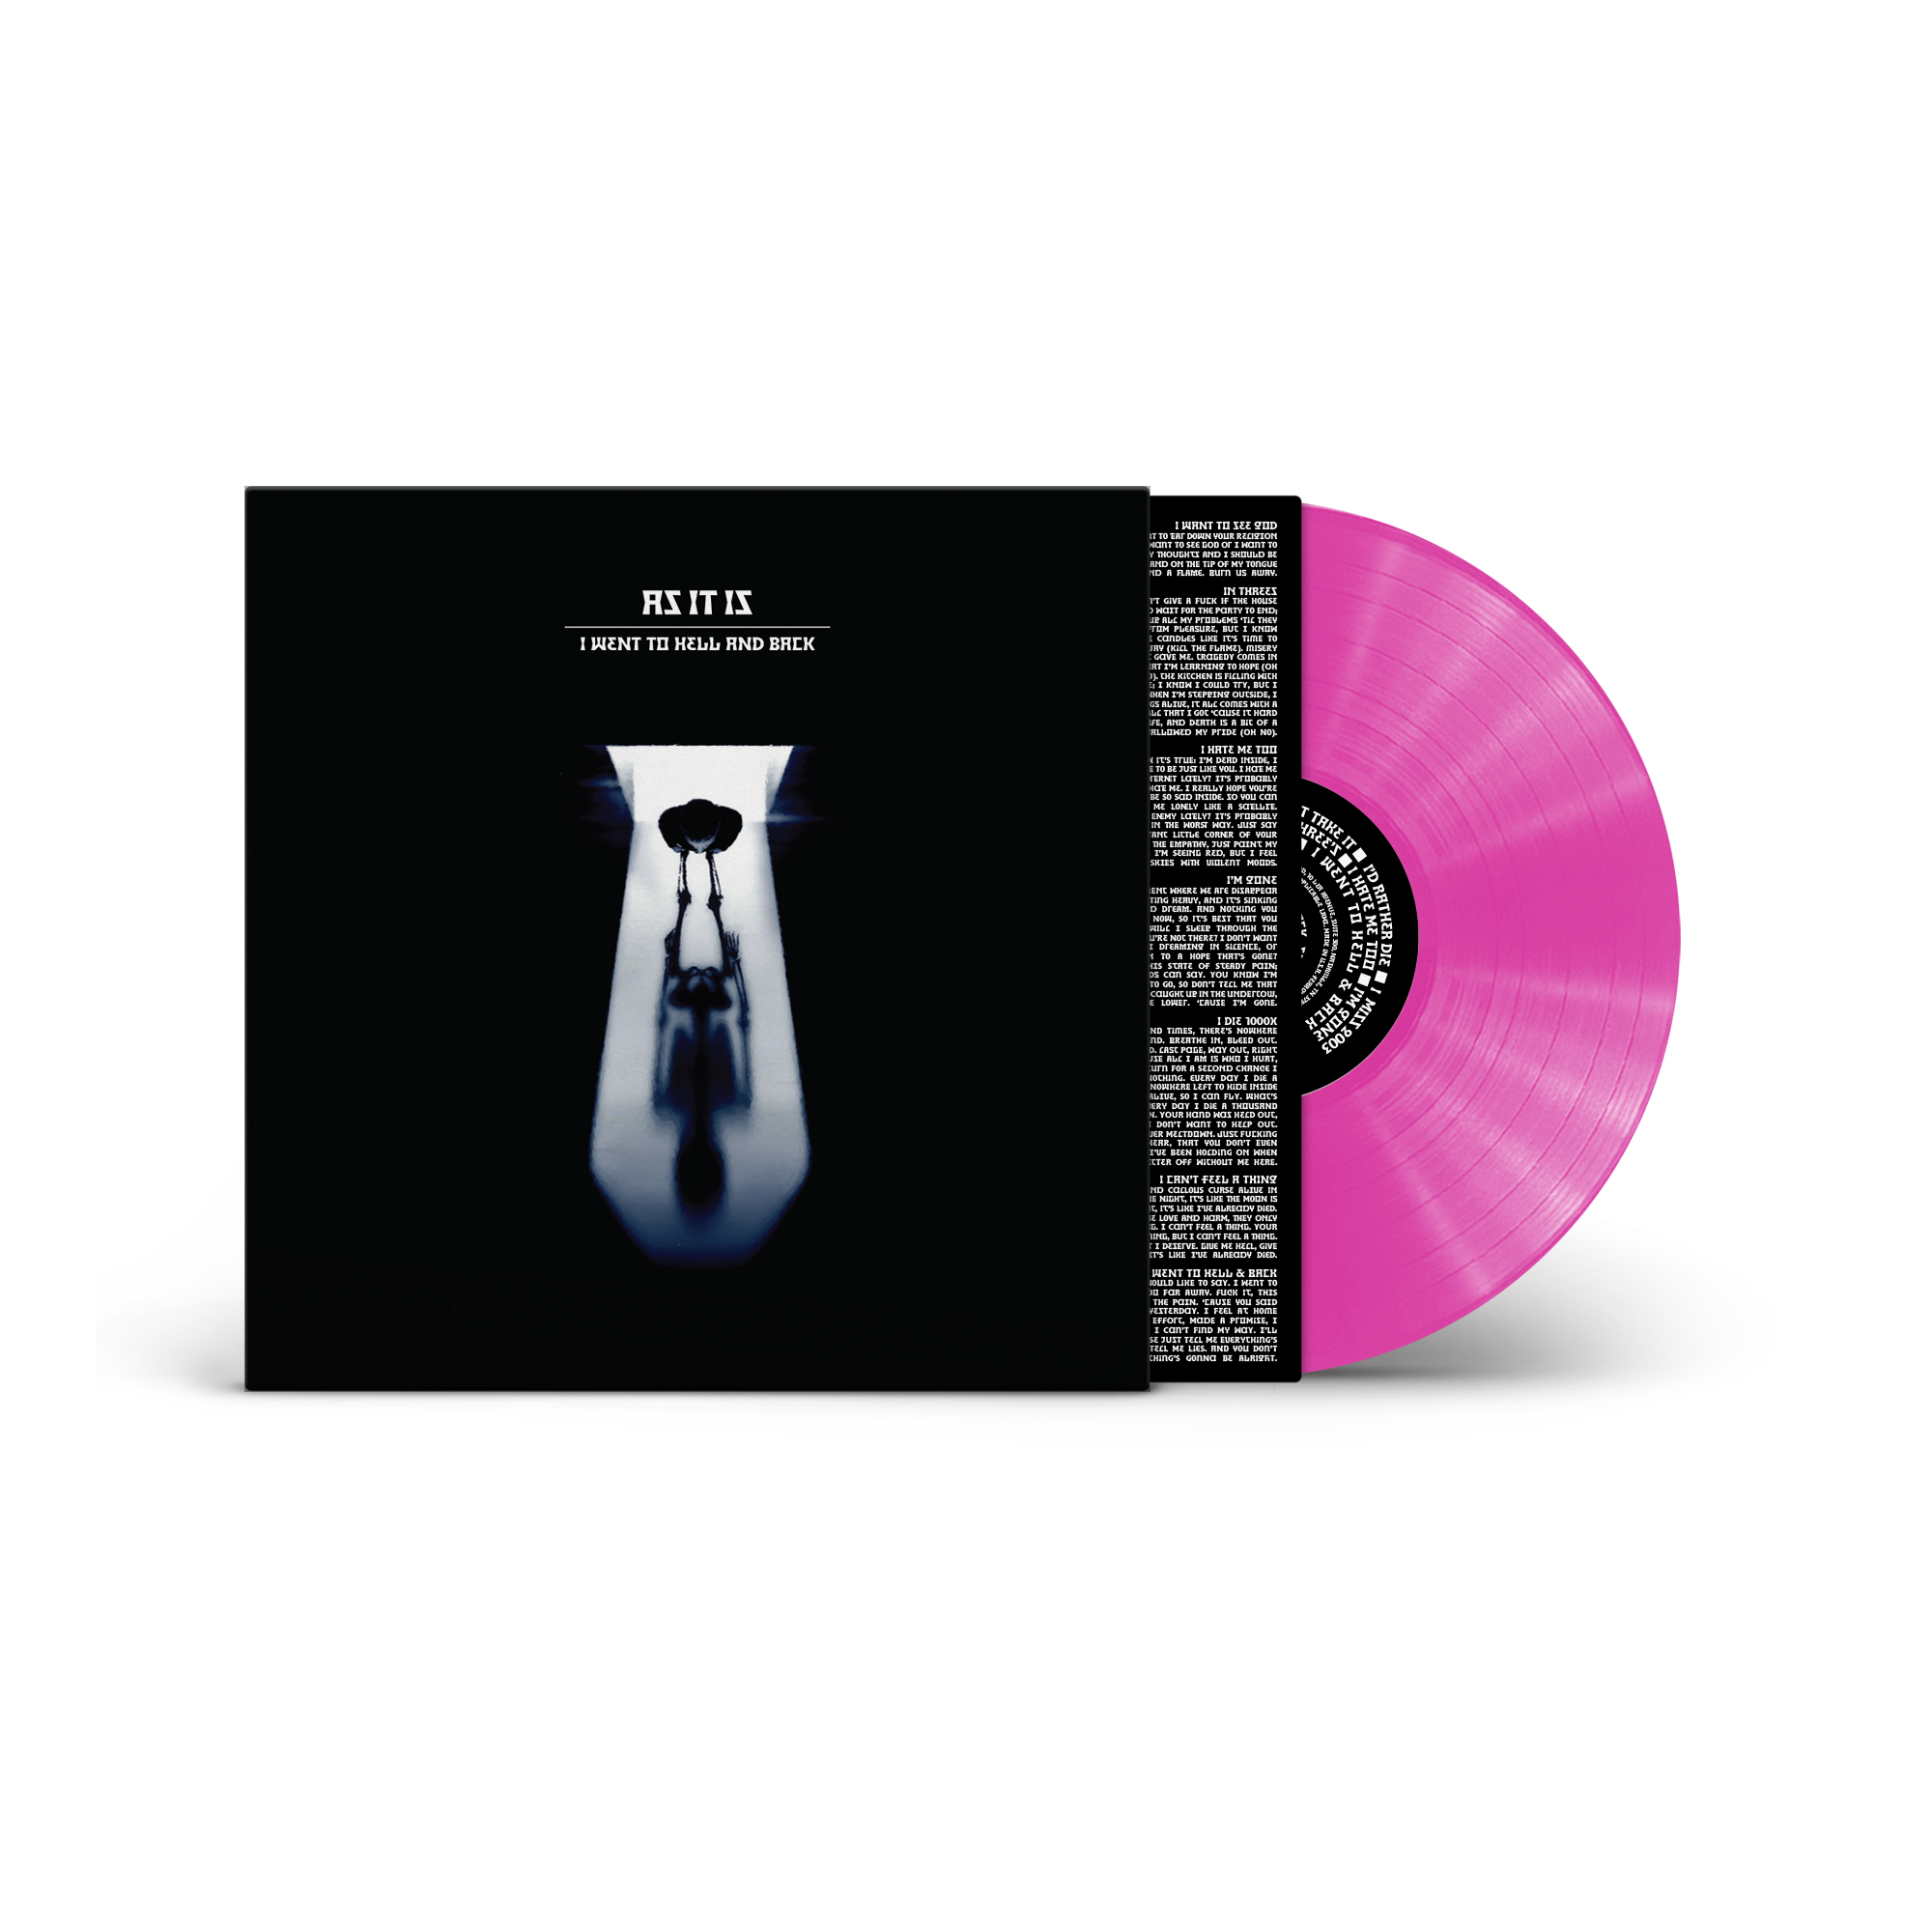 As It Is - I Went To Hell And Back [Pink Vinyl]